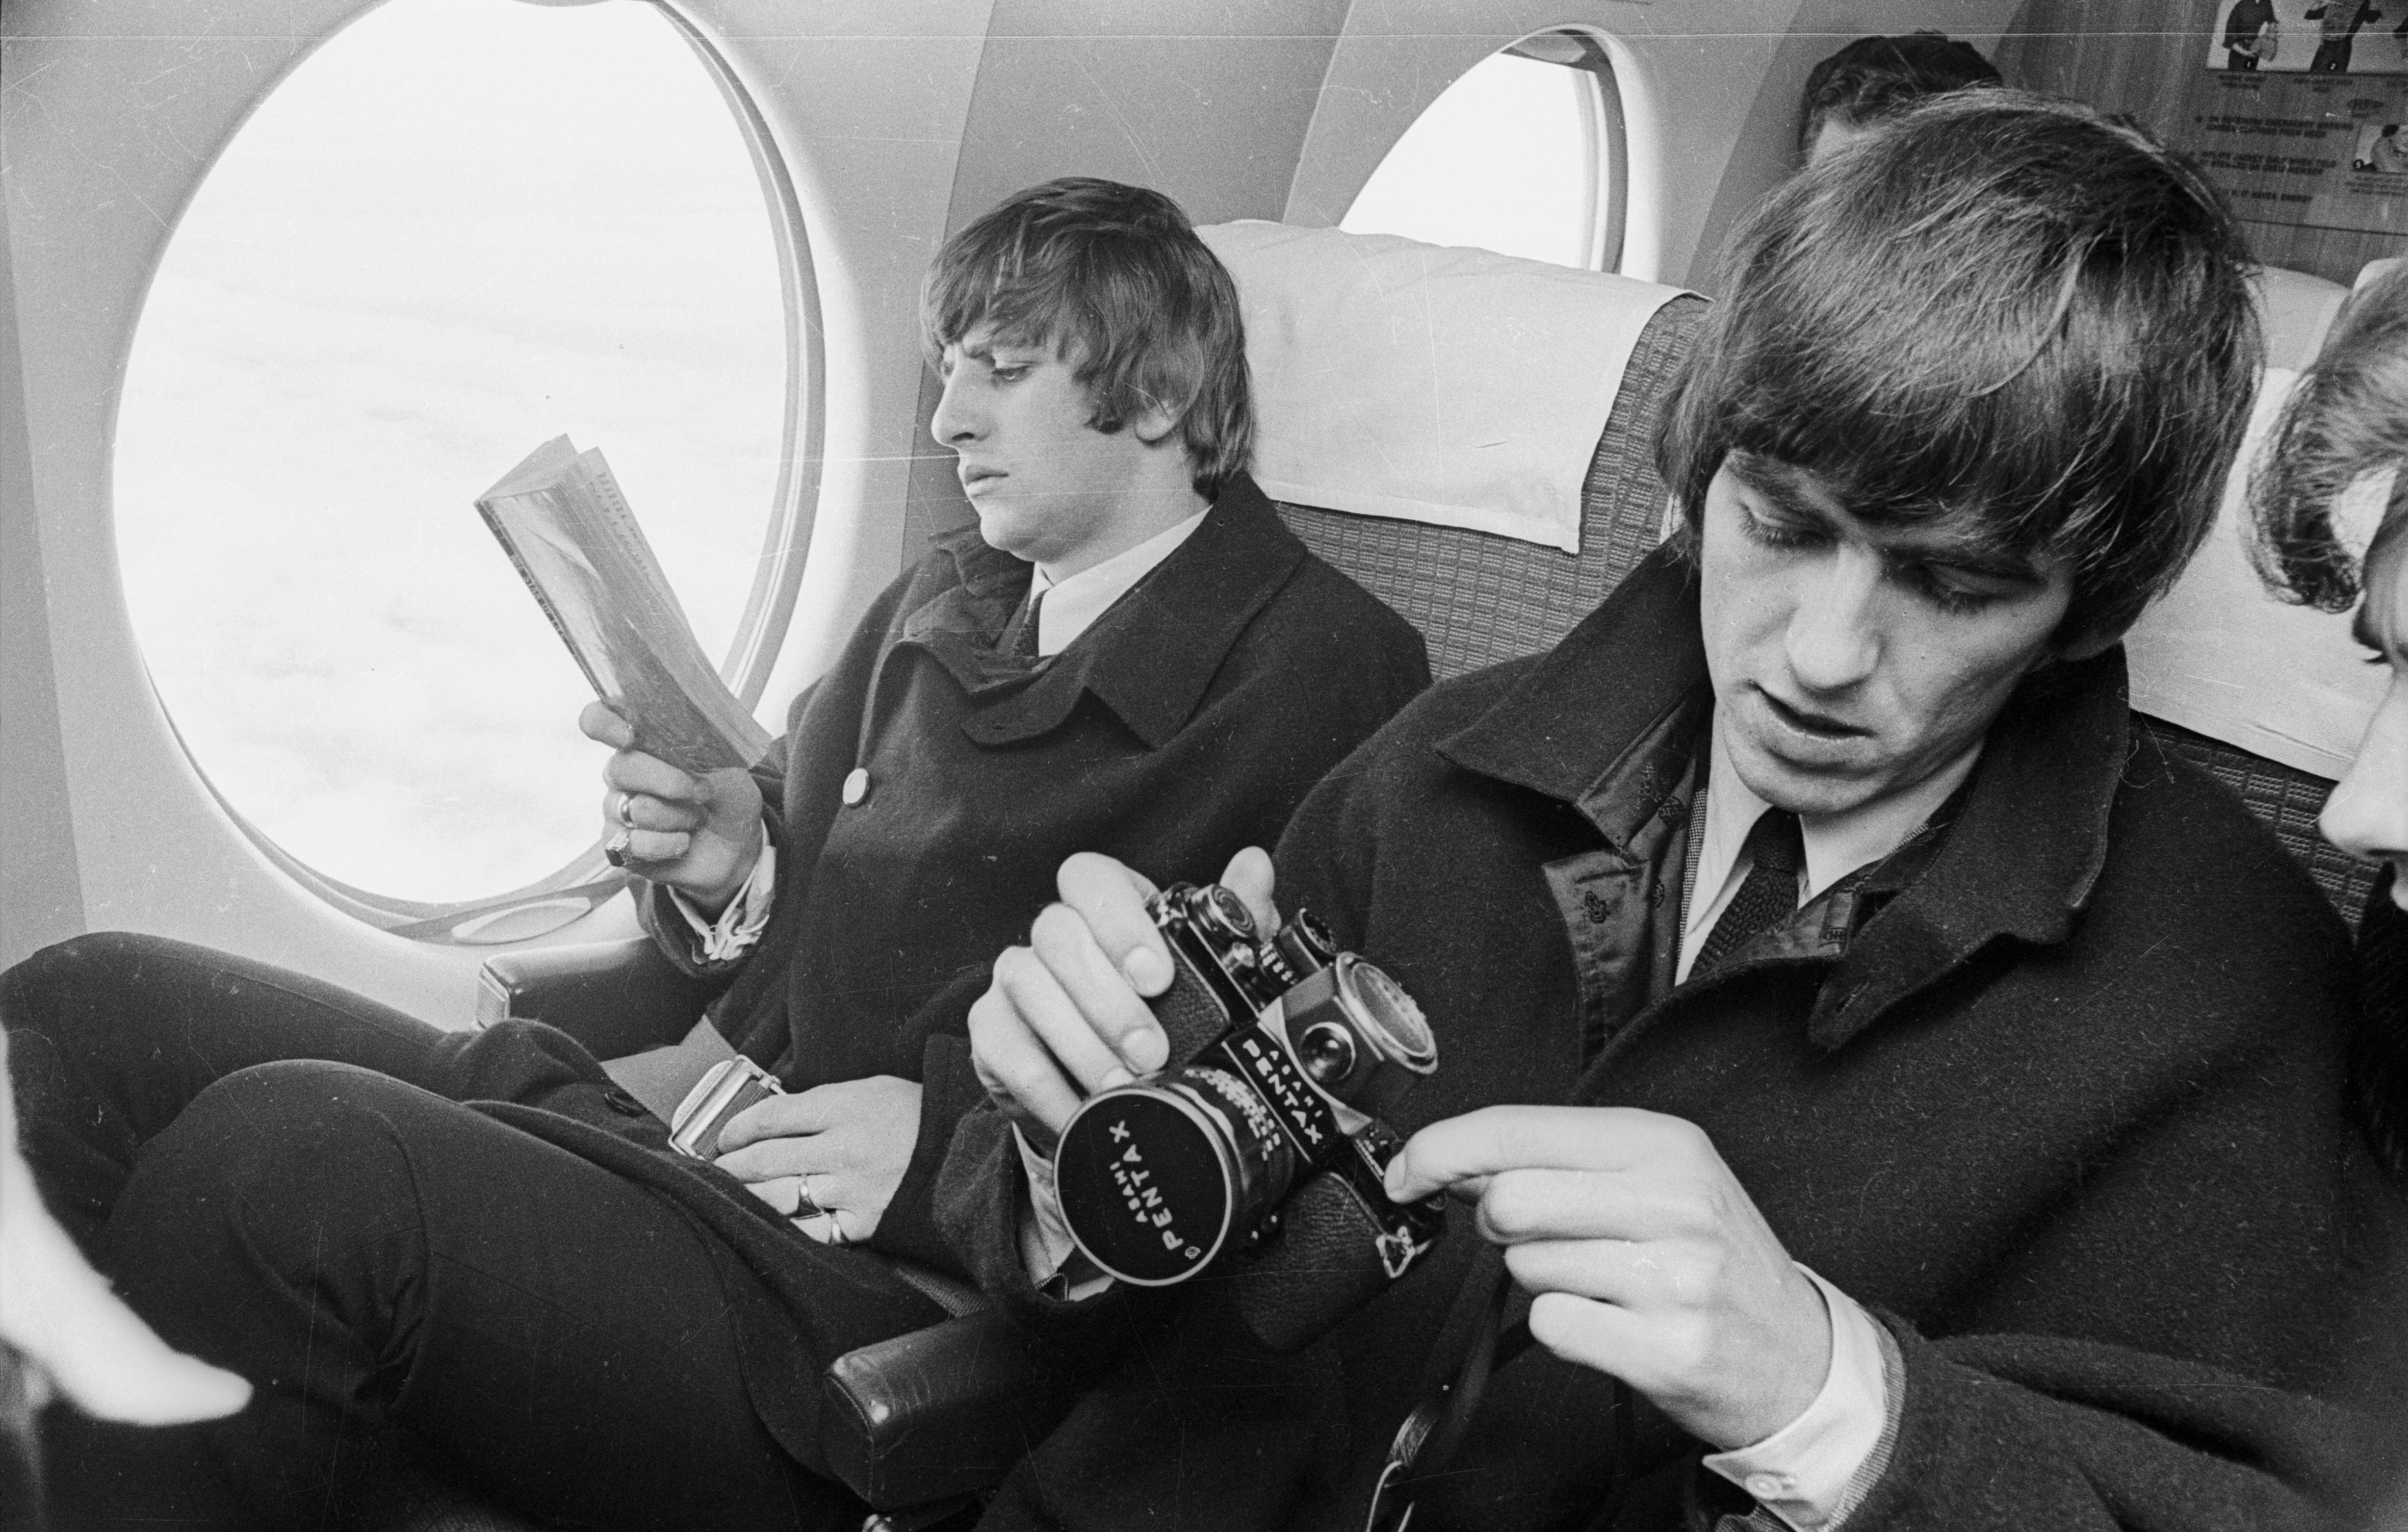 Beatles Ringo Starr and George Harrison on a plane with book and camera.